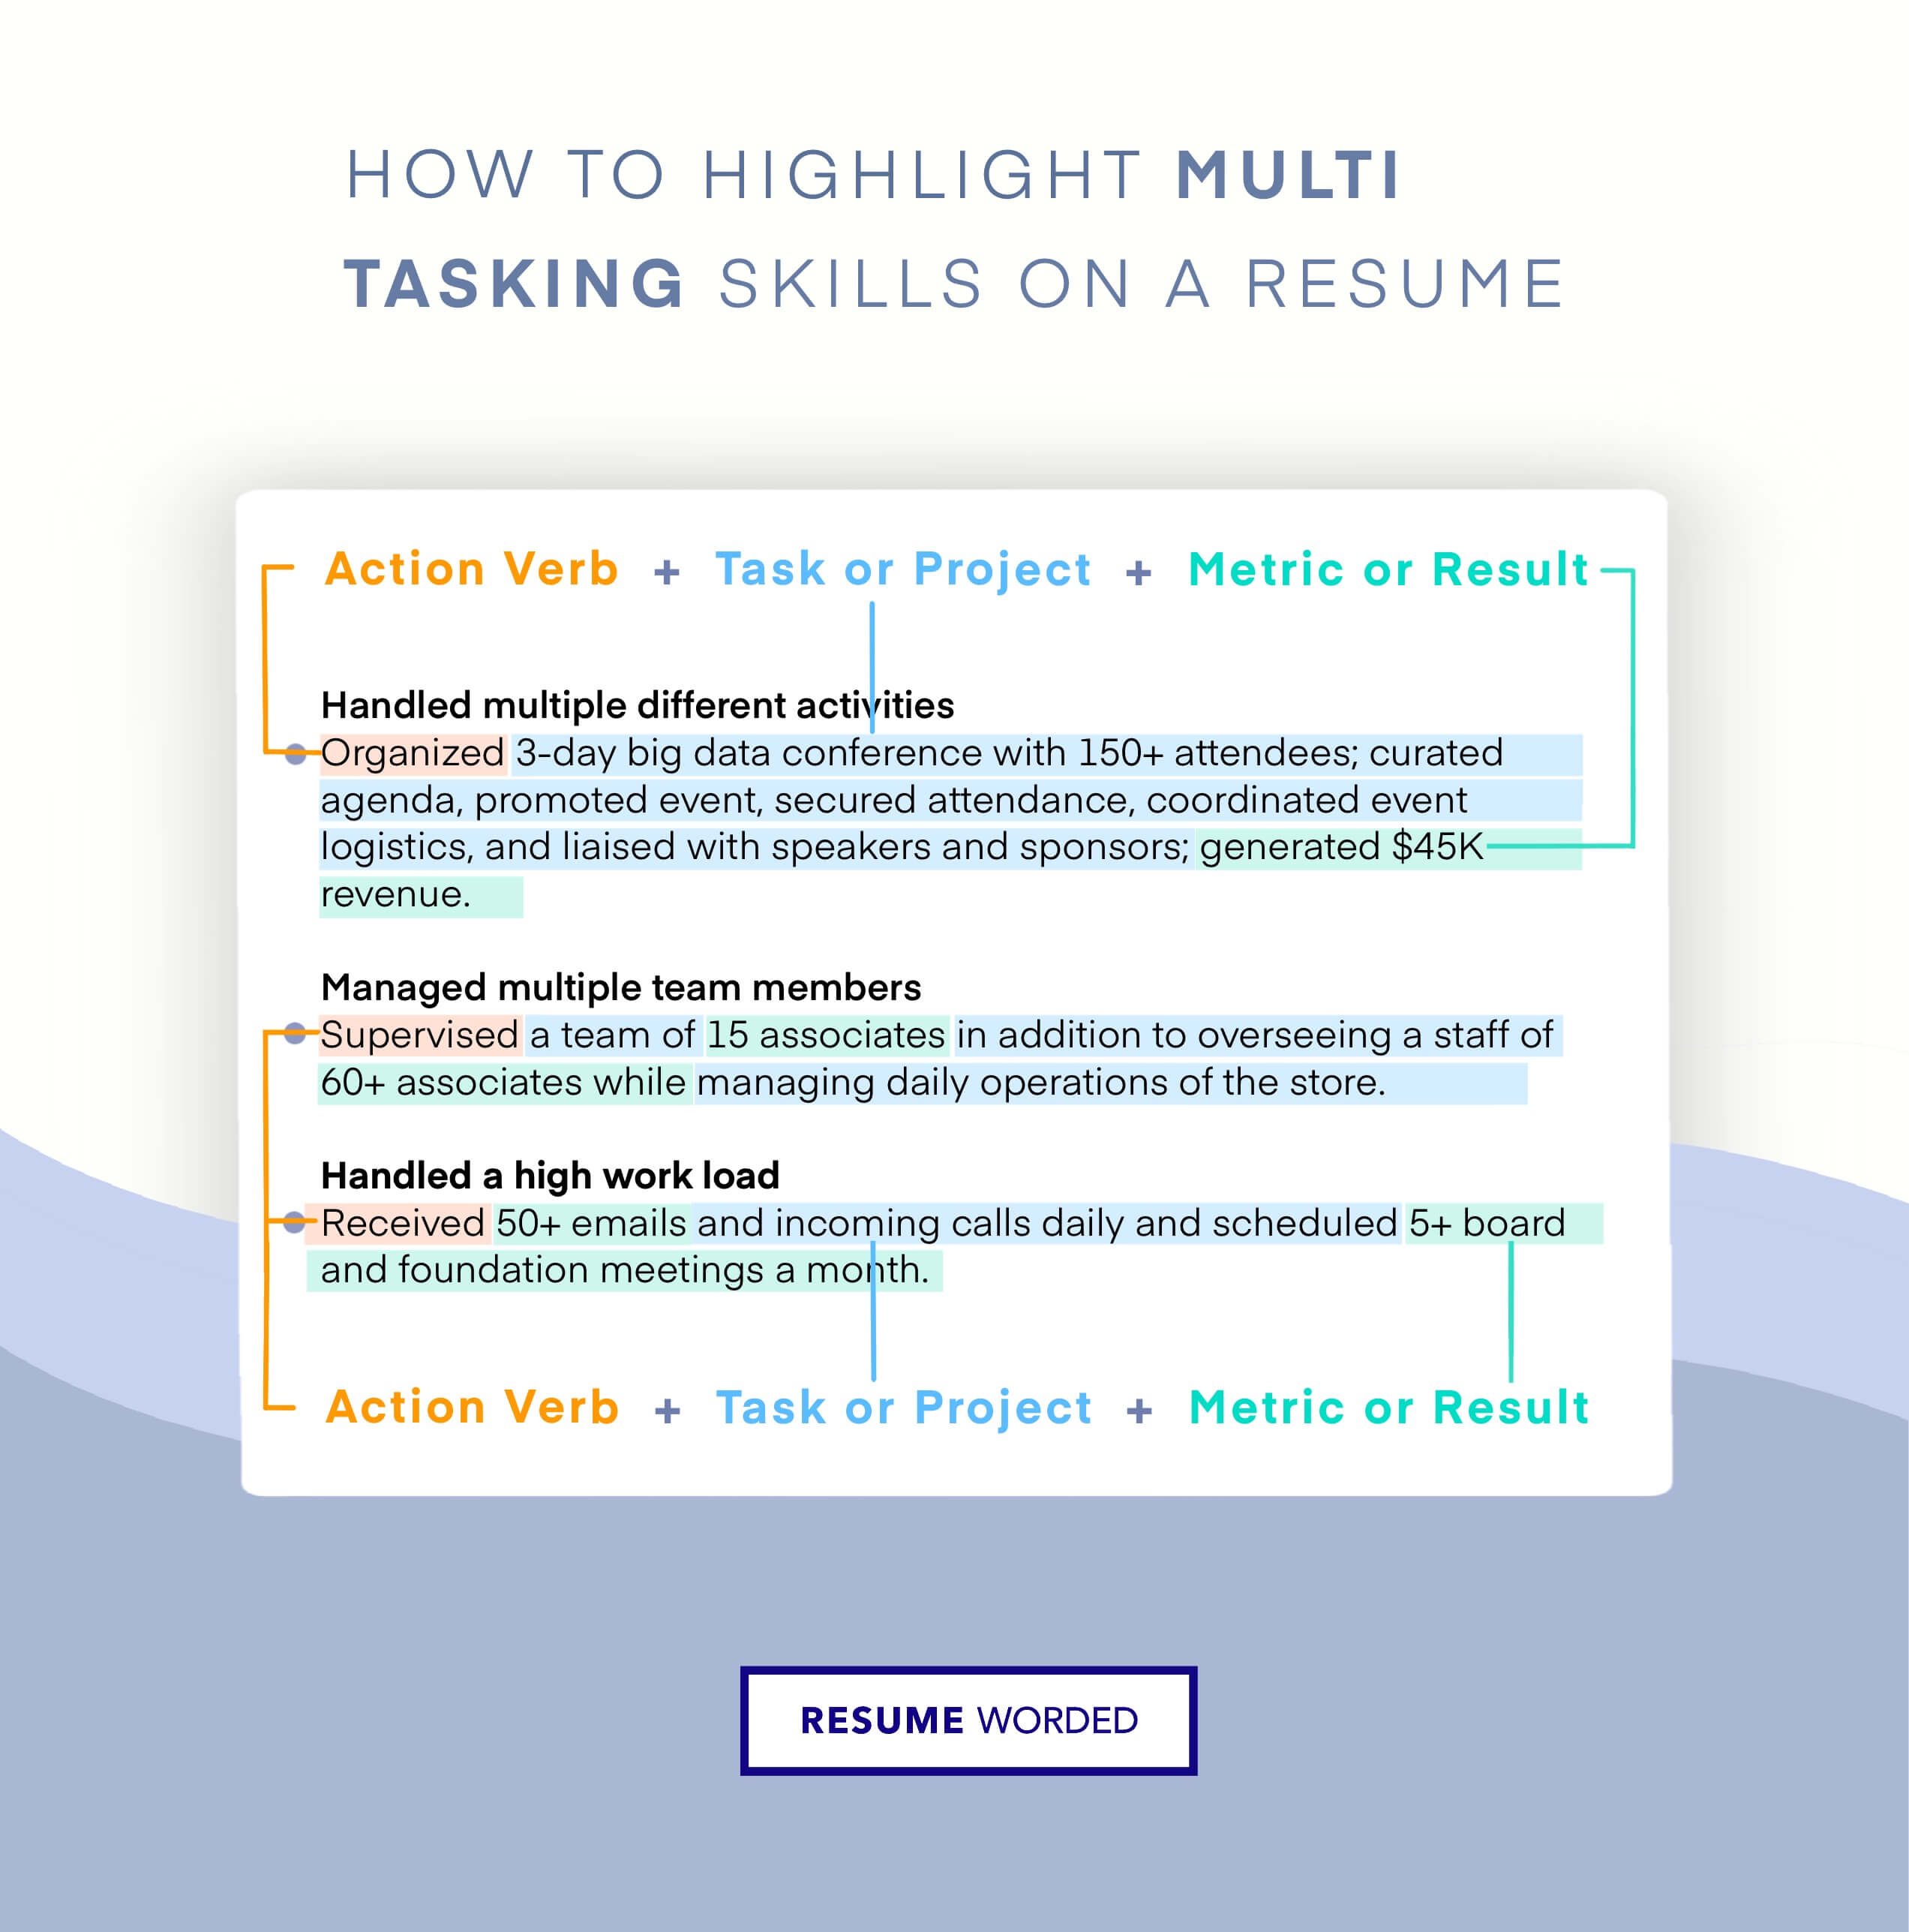 An example of how to write resume accomplishments to demonstrate soft skills like multitasking